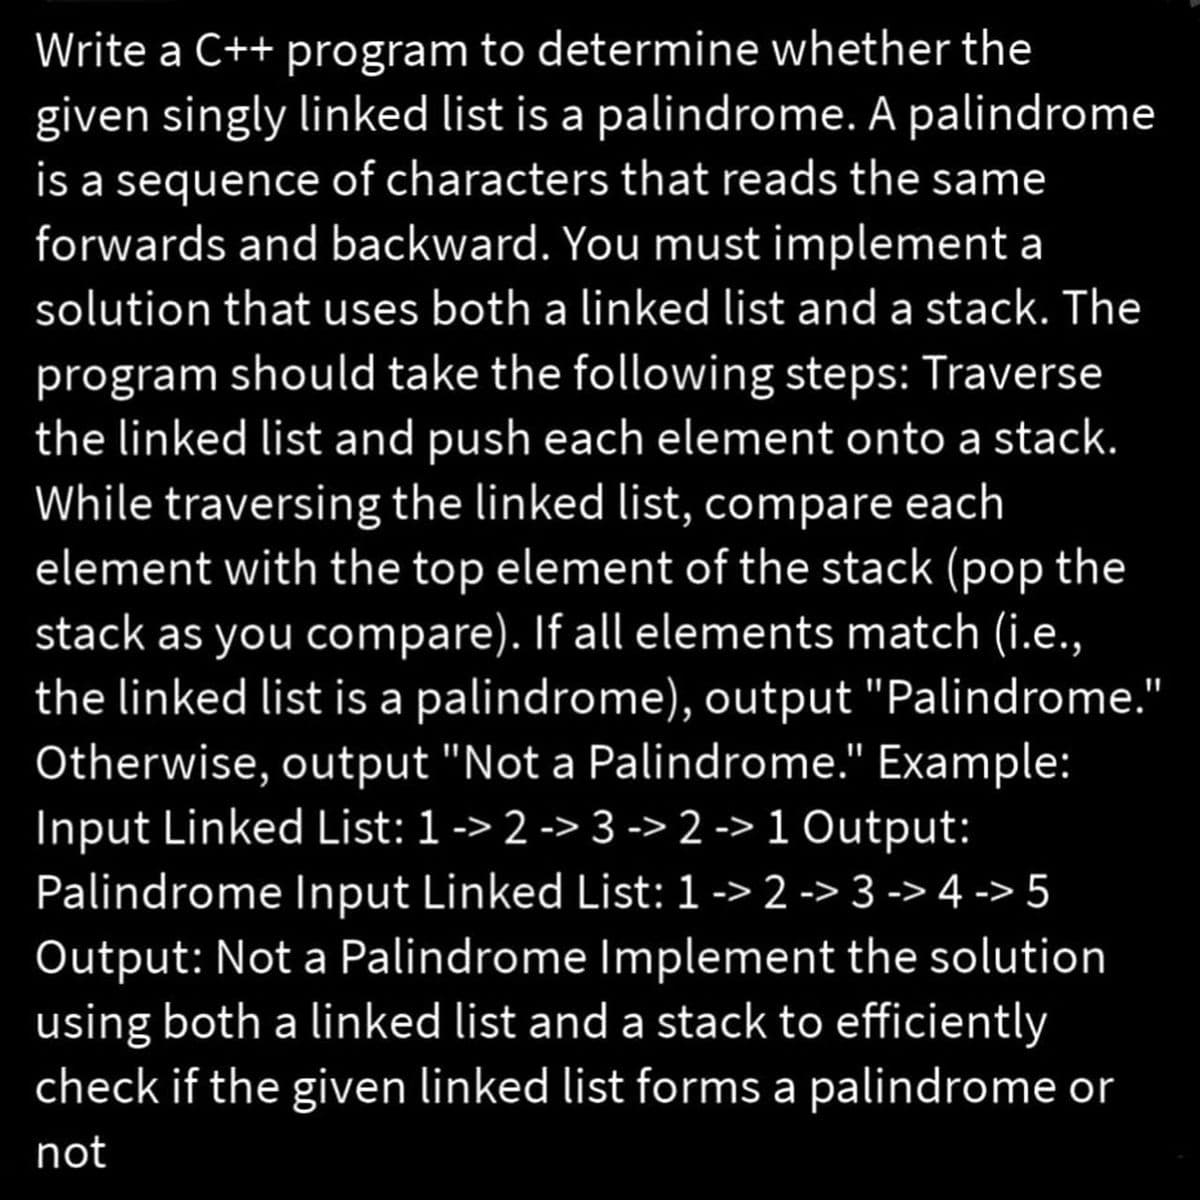 Write a C++ program to determine whether the
given singly linked list is a palindrome. A palindrome
is a sequence of characters that reads the same
forwards and backward. You must implement a
solution that uses both a linked list and a stack. The
program should take the following steps: Traverse
the linked list and push each element onto a stack.
While traversing the linked list, compare each
element with the top element of the stack (pop the
stack as you compare). If all elements match (i.e.,
the linked list is a palindrome), output "Palindrome."
Otherwise, output "Not a Palindrome." Example:
Input Linked List: 1 -> 2 -> 3 -> 2 -> 1 Output:
Palindrome Input Linked List: 1 -> 2 -> 3 -> 4 -> 5
Output: Not a Palindrome Implement the solution
using both a linked list and a stack to efficiently
check if the given linked list forms a palindrome or
not